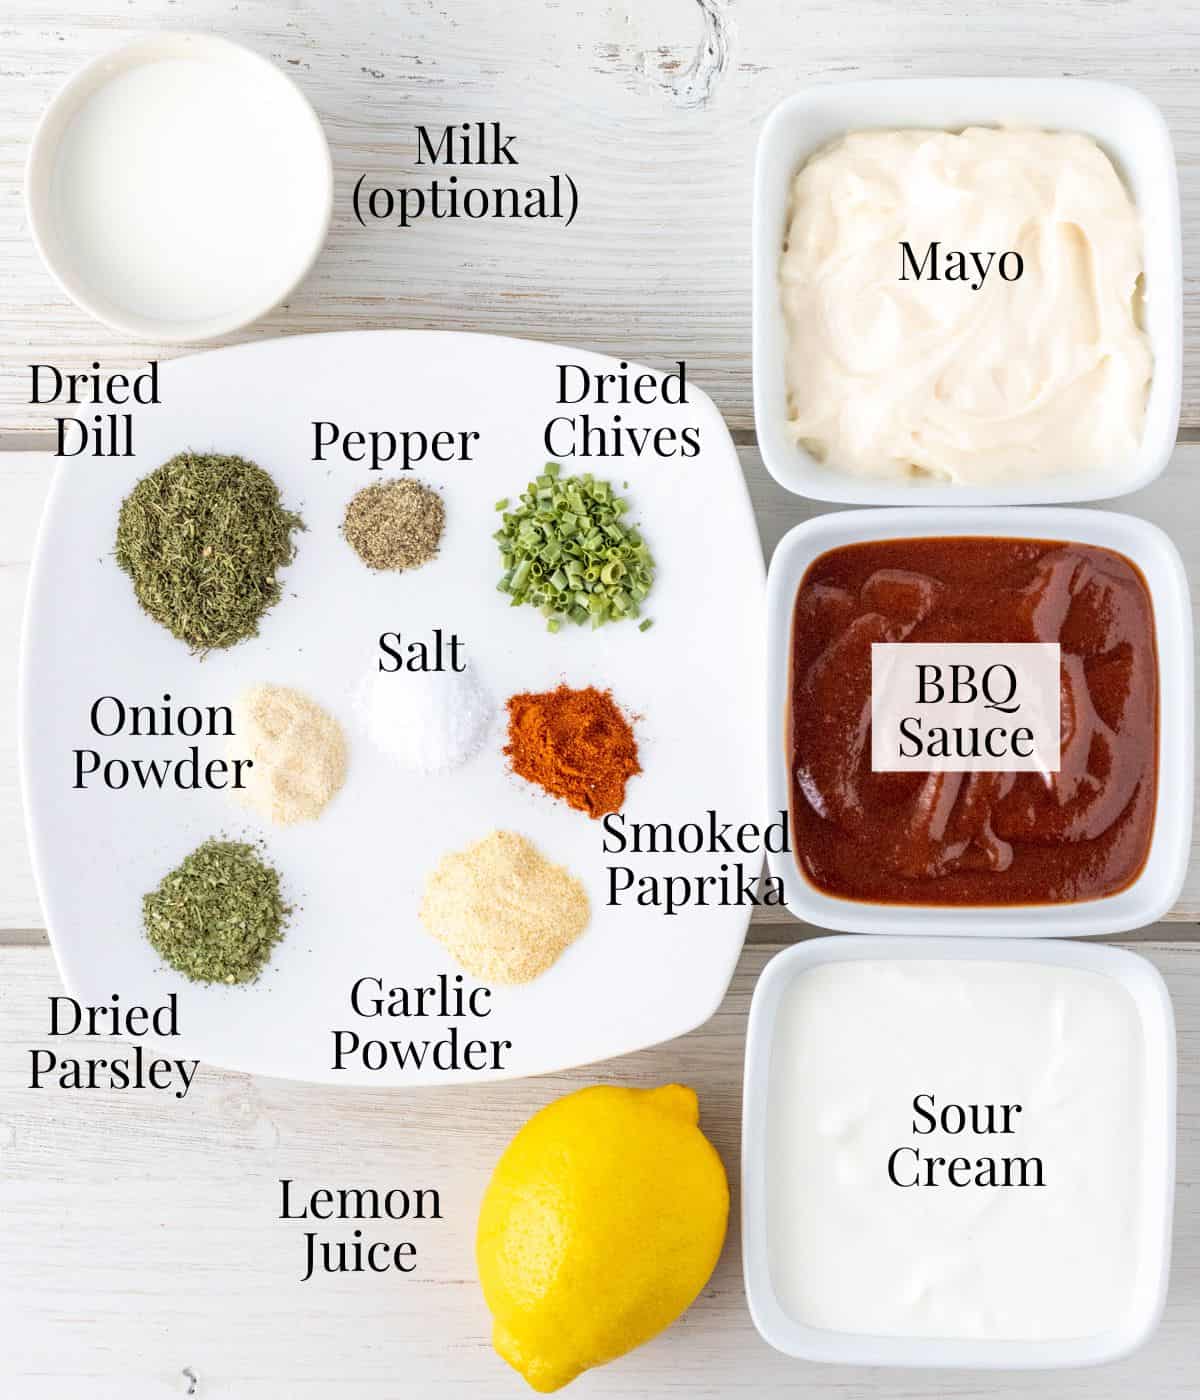 Ingredients for BBQ ranch labeled.